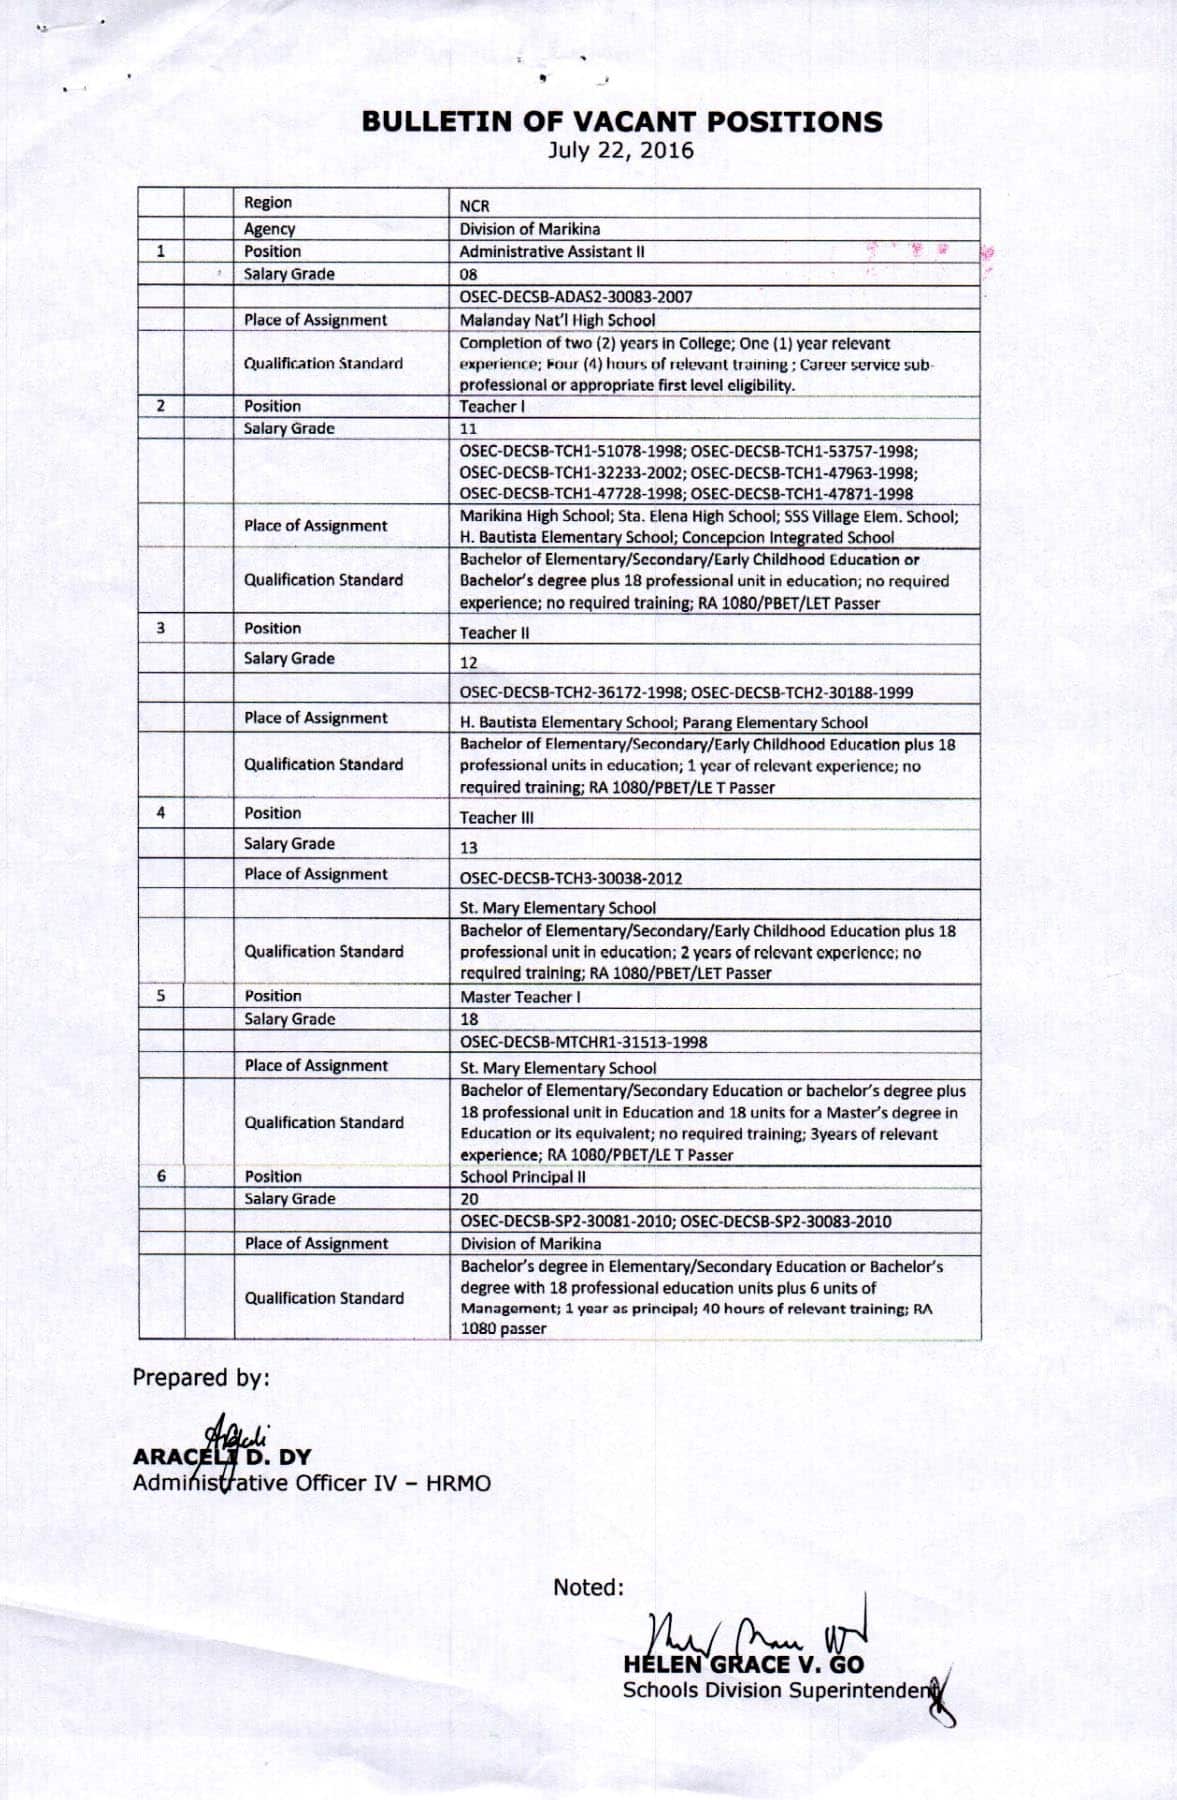 DepEd Marikina Bulletin of Vacant Positions as of July 22, 2016